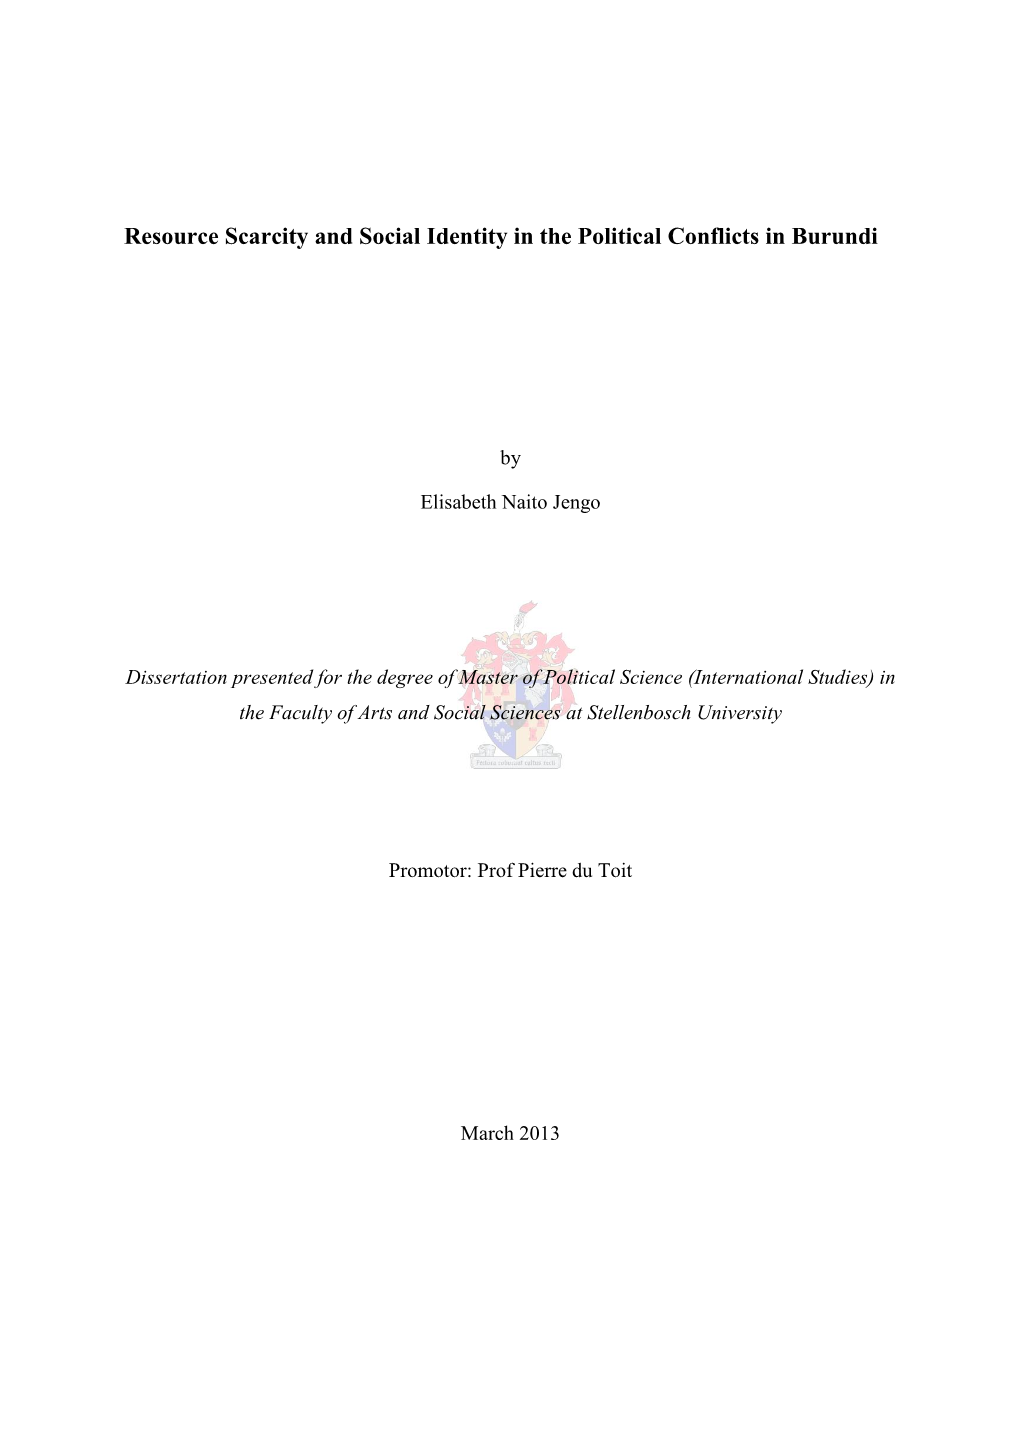 Resource Scarcity and Social Identity in the Political Conflicts in Burundi